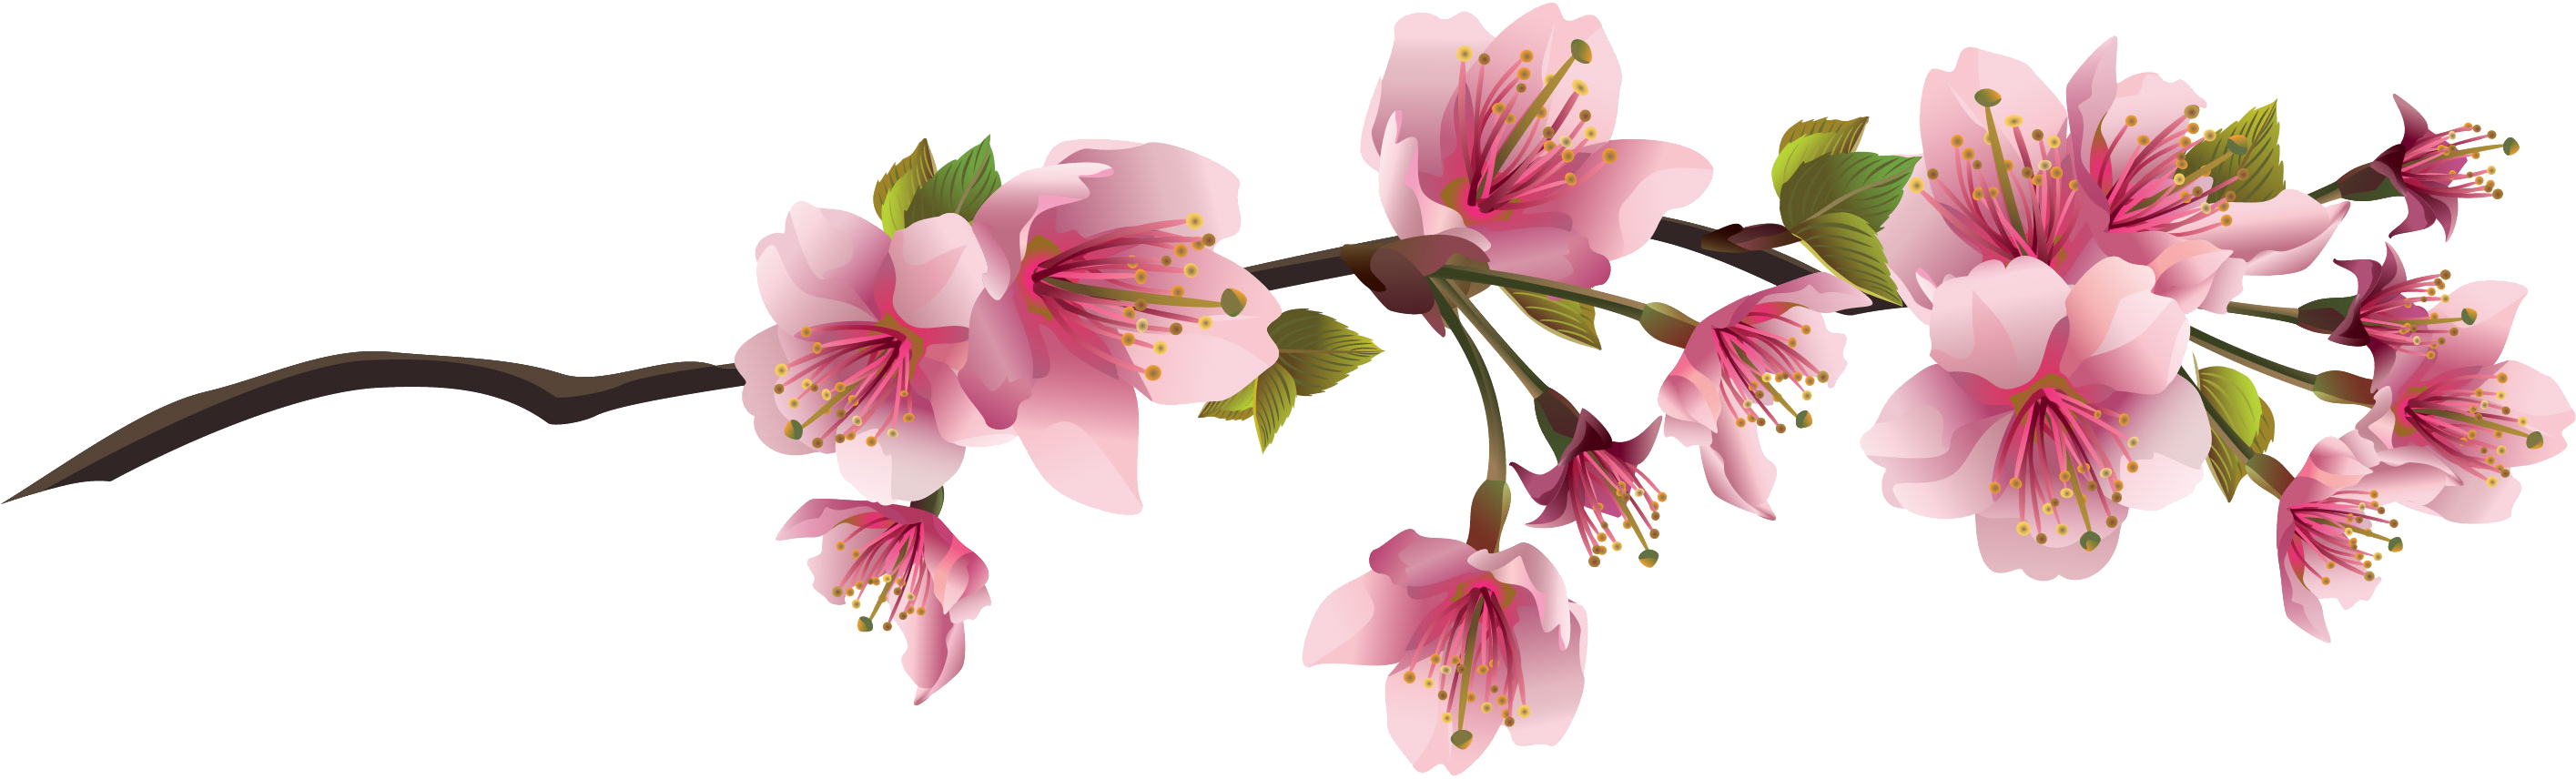 Cherry Blossom Branch Clip Art - Cherry Blossom Leaves Png (2830x856)